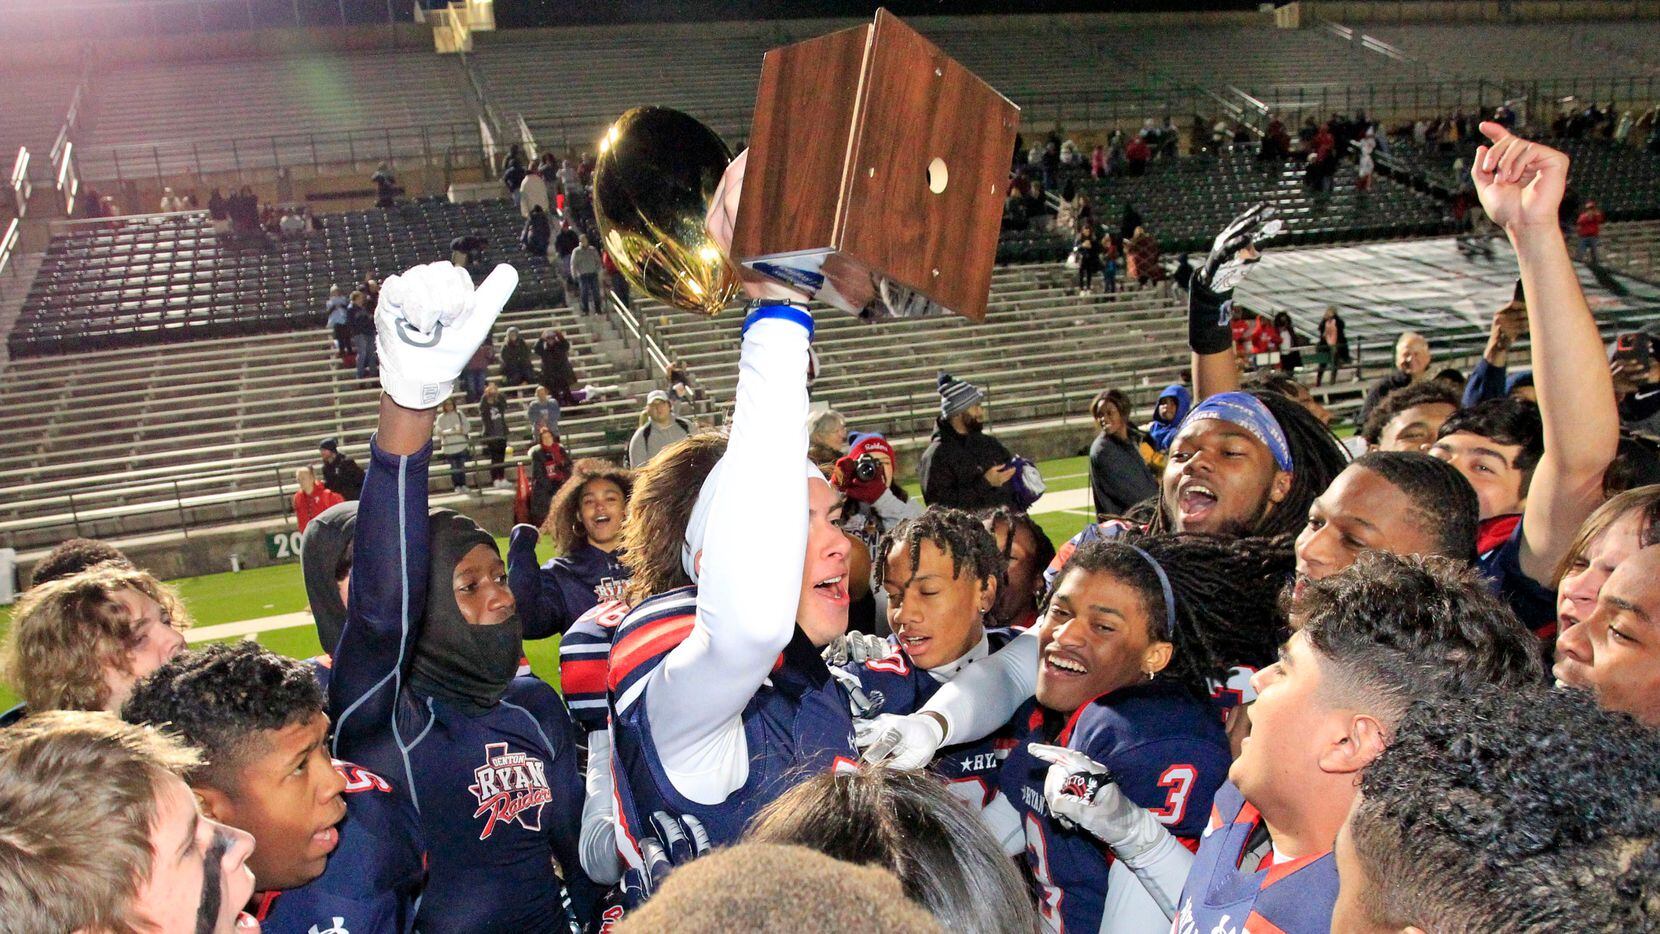 Denton Ryan K Clayton Roblyer (83) holds the game trophy high, after the Ryan coach presented it to him at the end of Ryan’s 37-33 win over Longview in the Class 5A Division I Region II semifinal football playoff game at Mesquite Memorial Stadium in Mesquite on Friday, November 26, 2021. (John F. Rhodes / Special Contributor) 